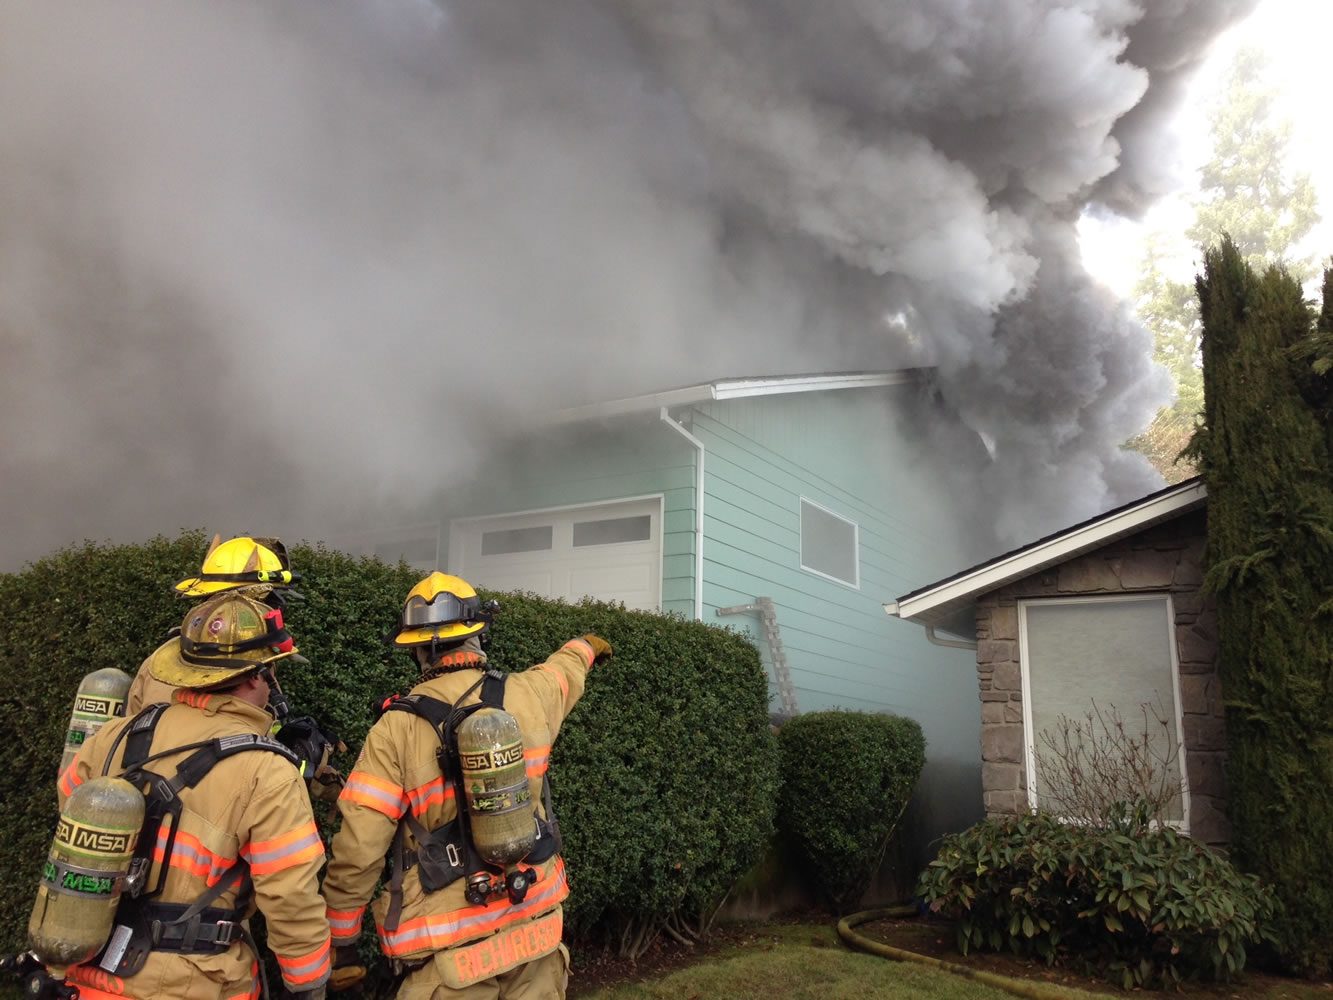 Firefighters have contained a blaze at a house in Camas that was reported as starting in the living room.